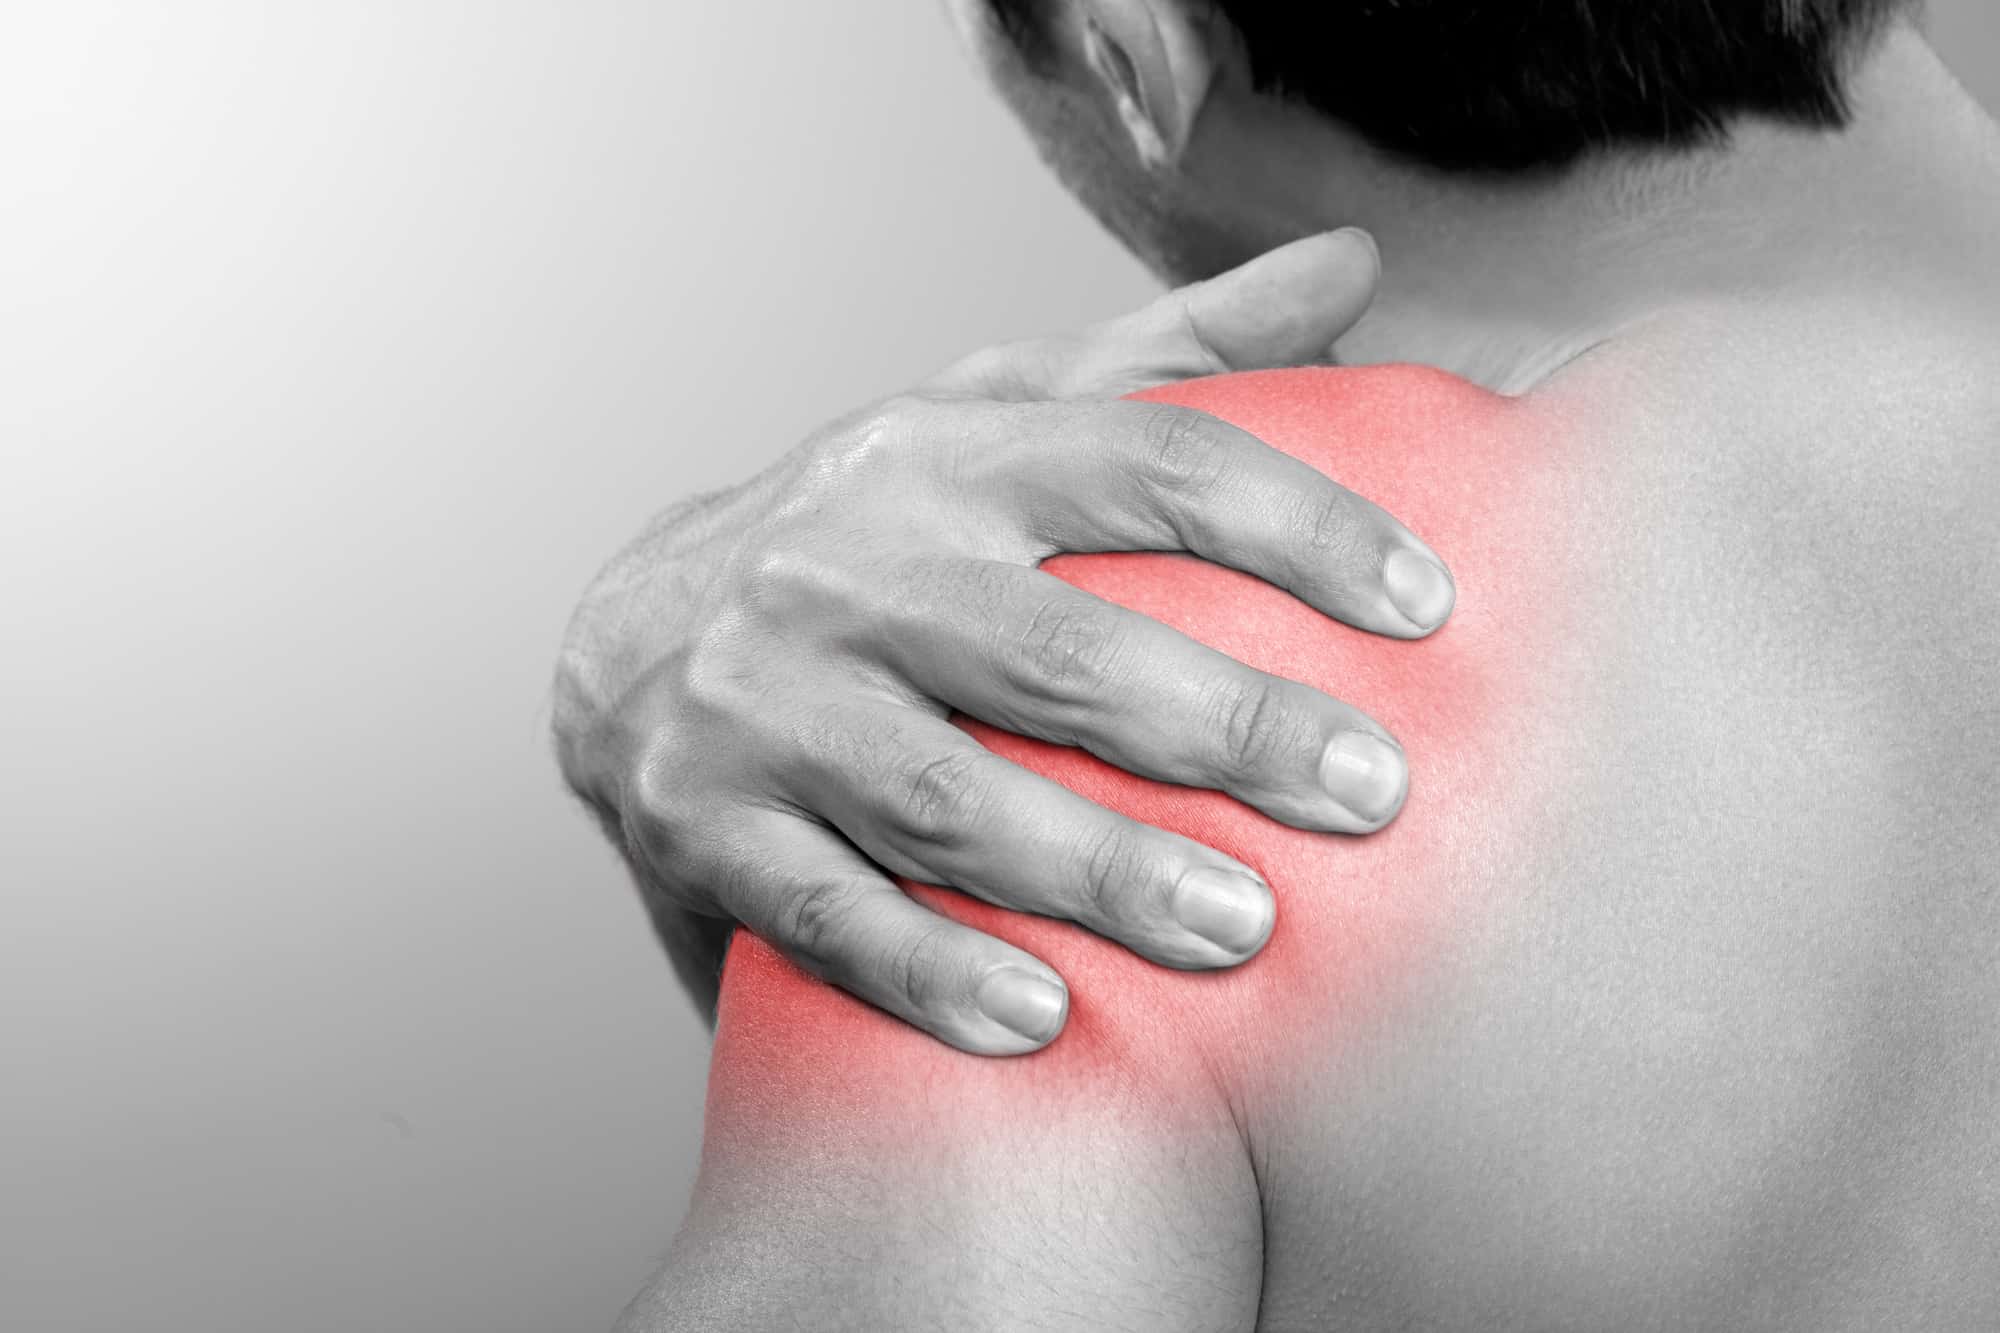 I Have A Pinched Nerve In My Shoulder; What Should I Do?